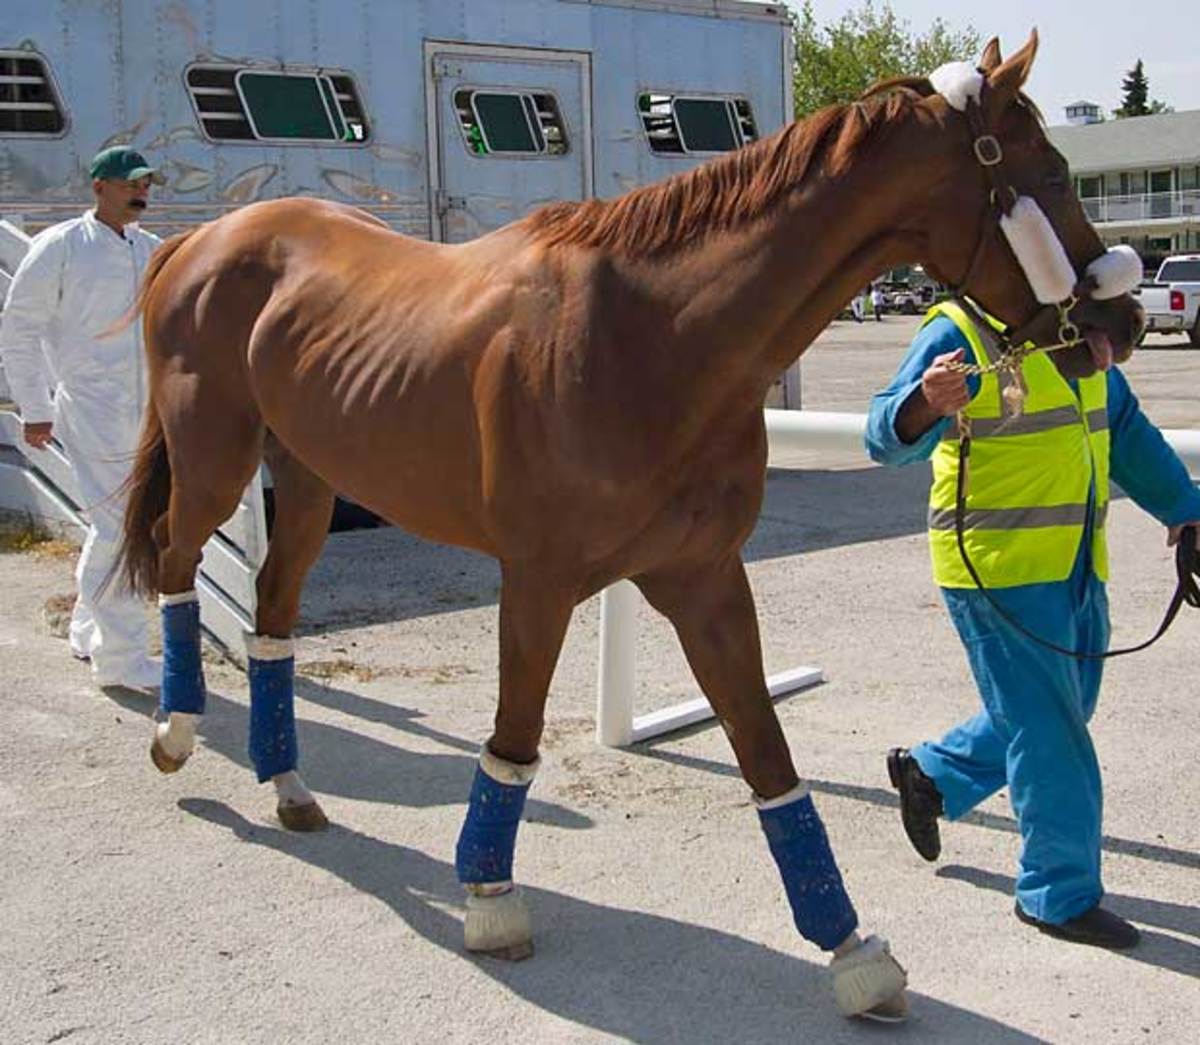 California Chrome looked alarmingly thin after his trip from England to Arlington Park on July 7.